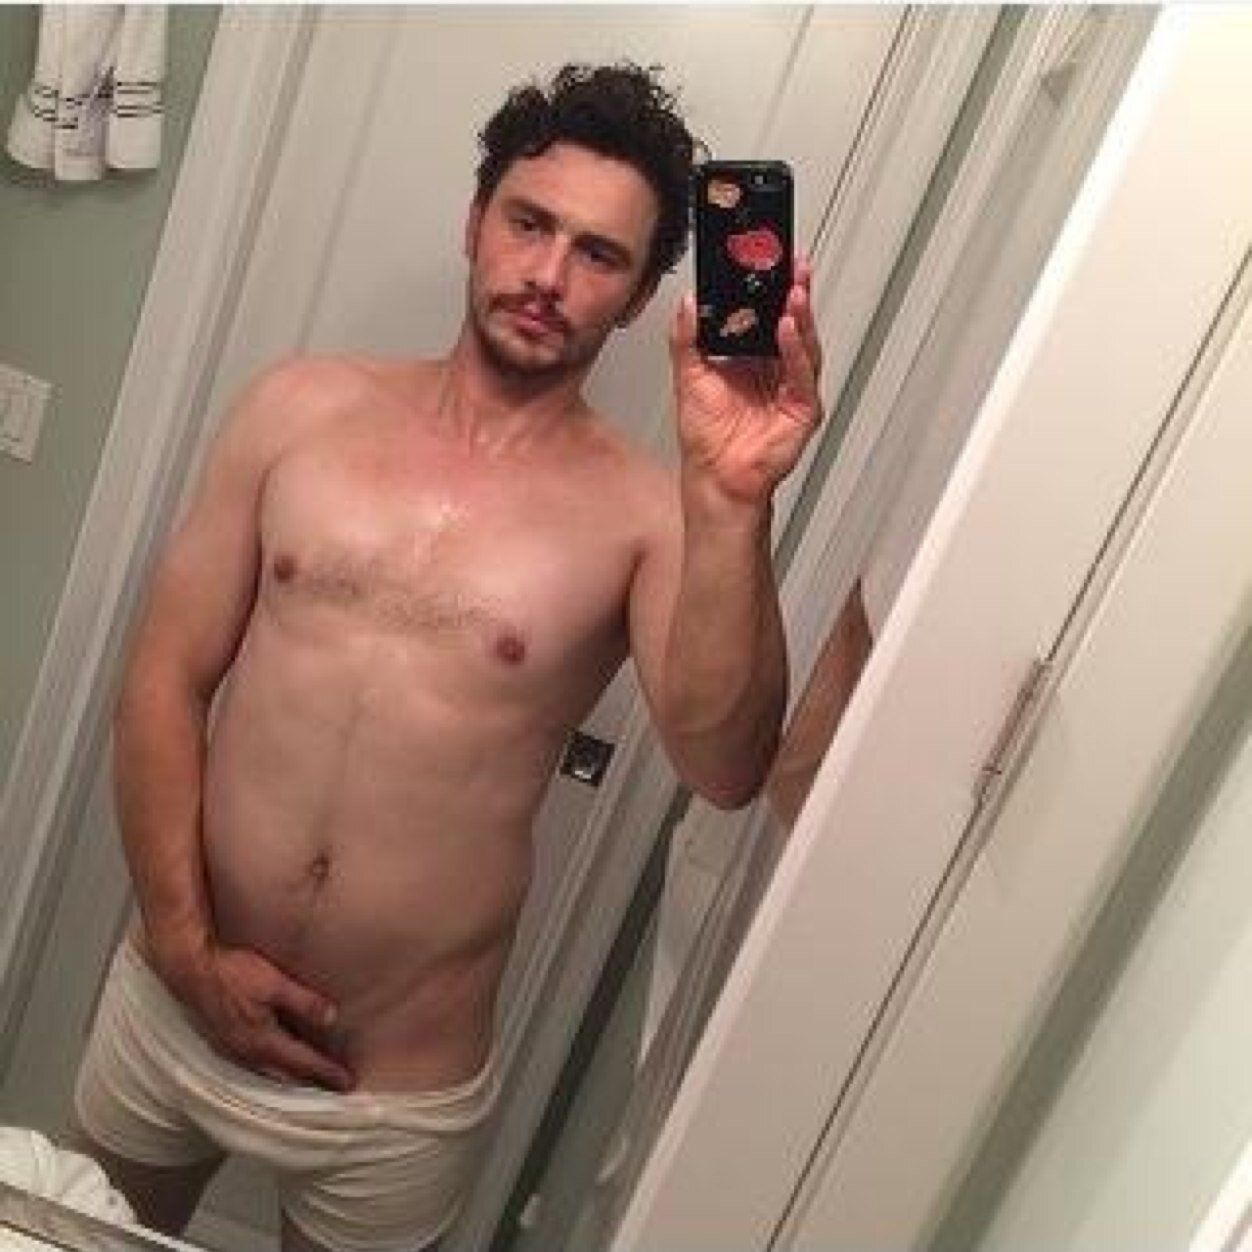 Video of the Day - James Franco Finally Explains Himself